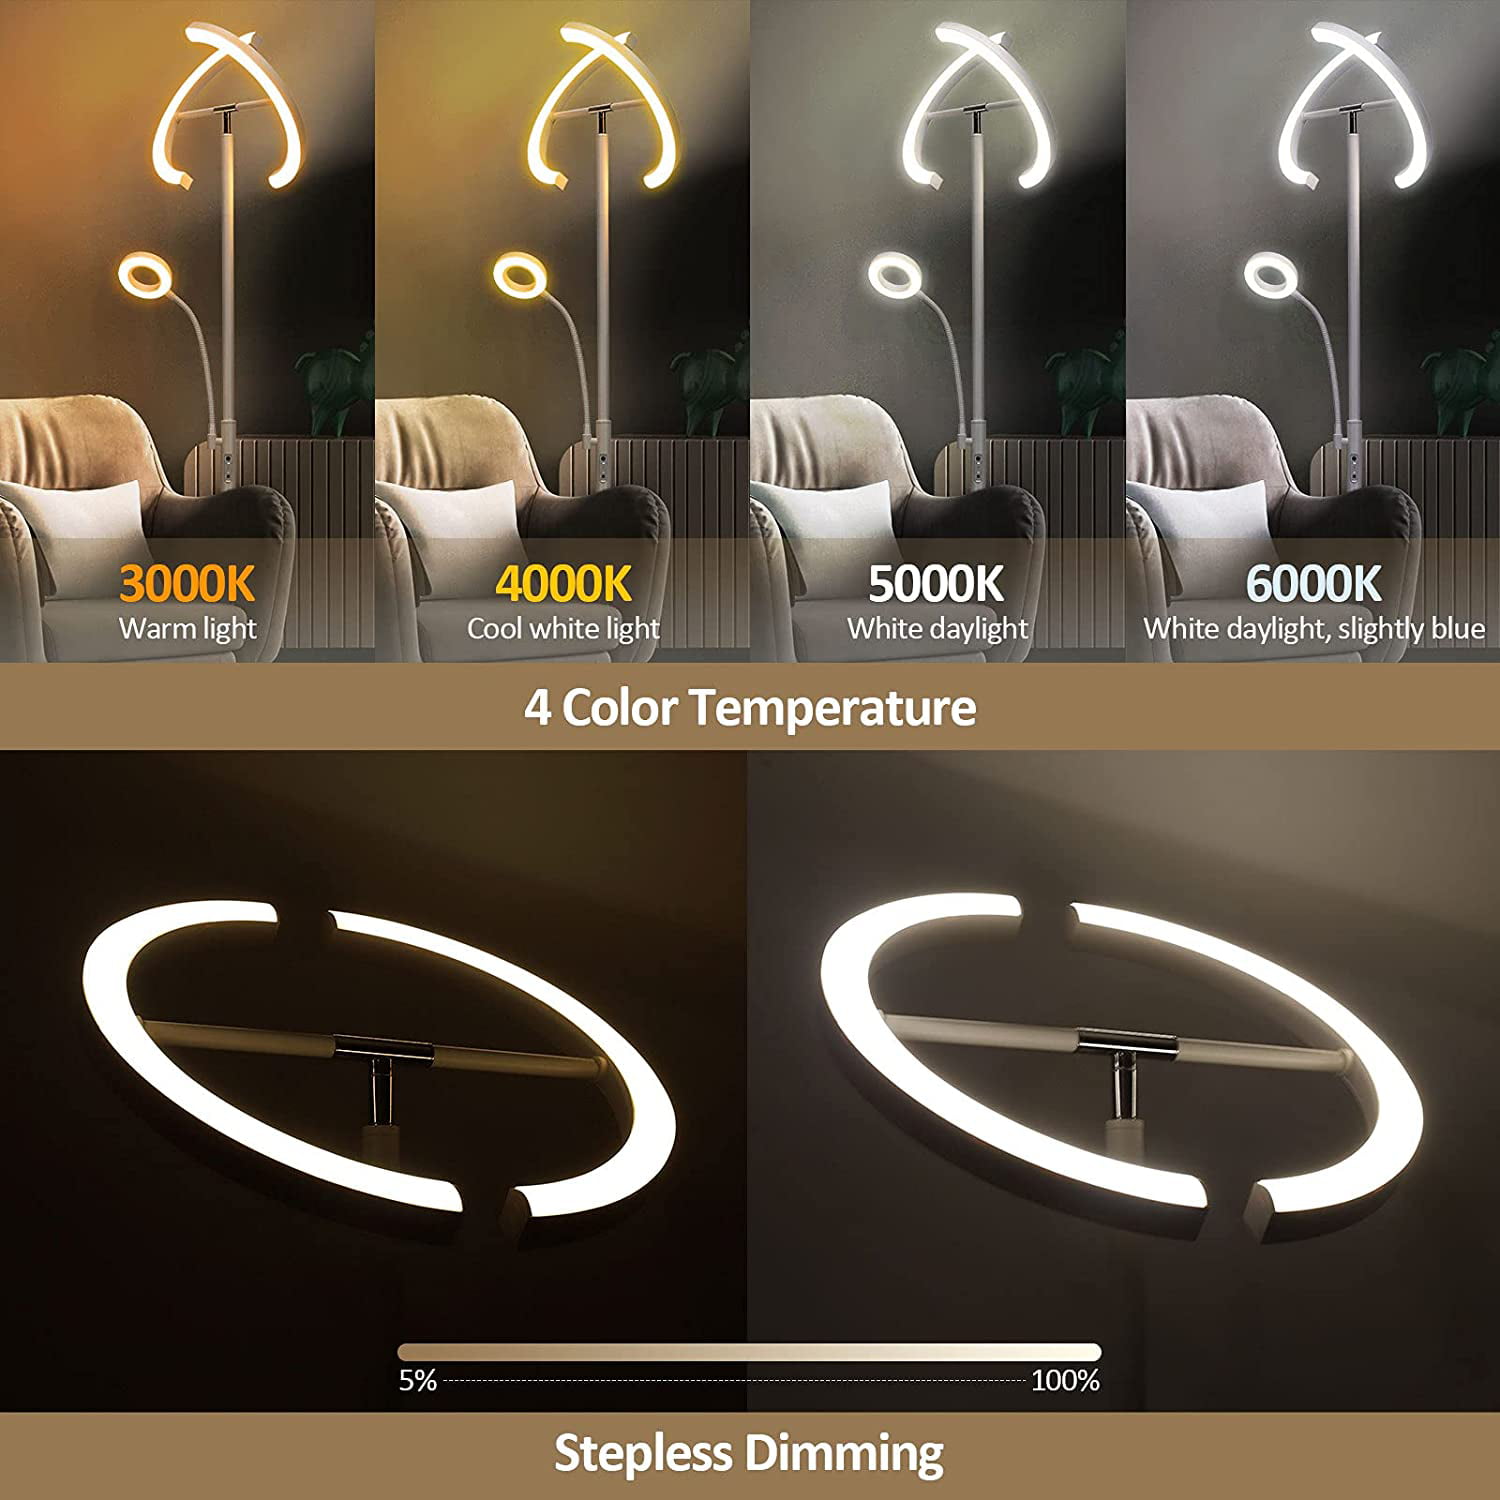 Lighting Tips & Intuition #35: Light Intensity & Color Temperature, by  Renfro Design Group